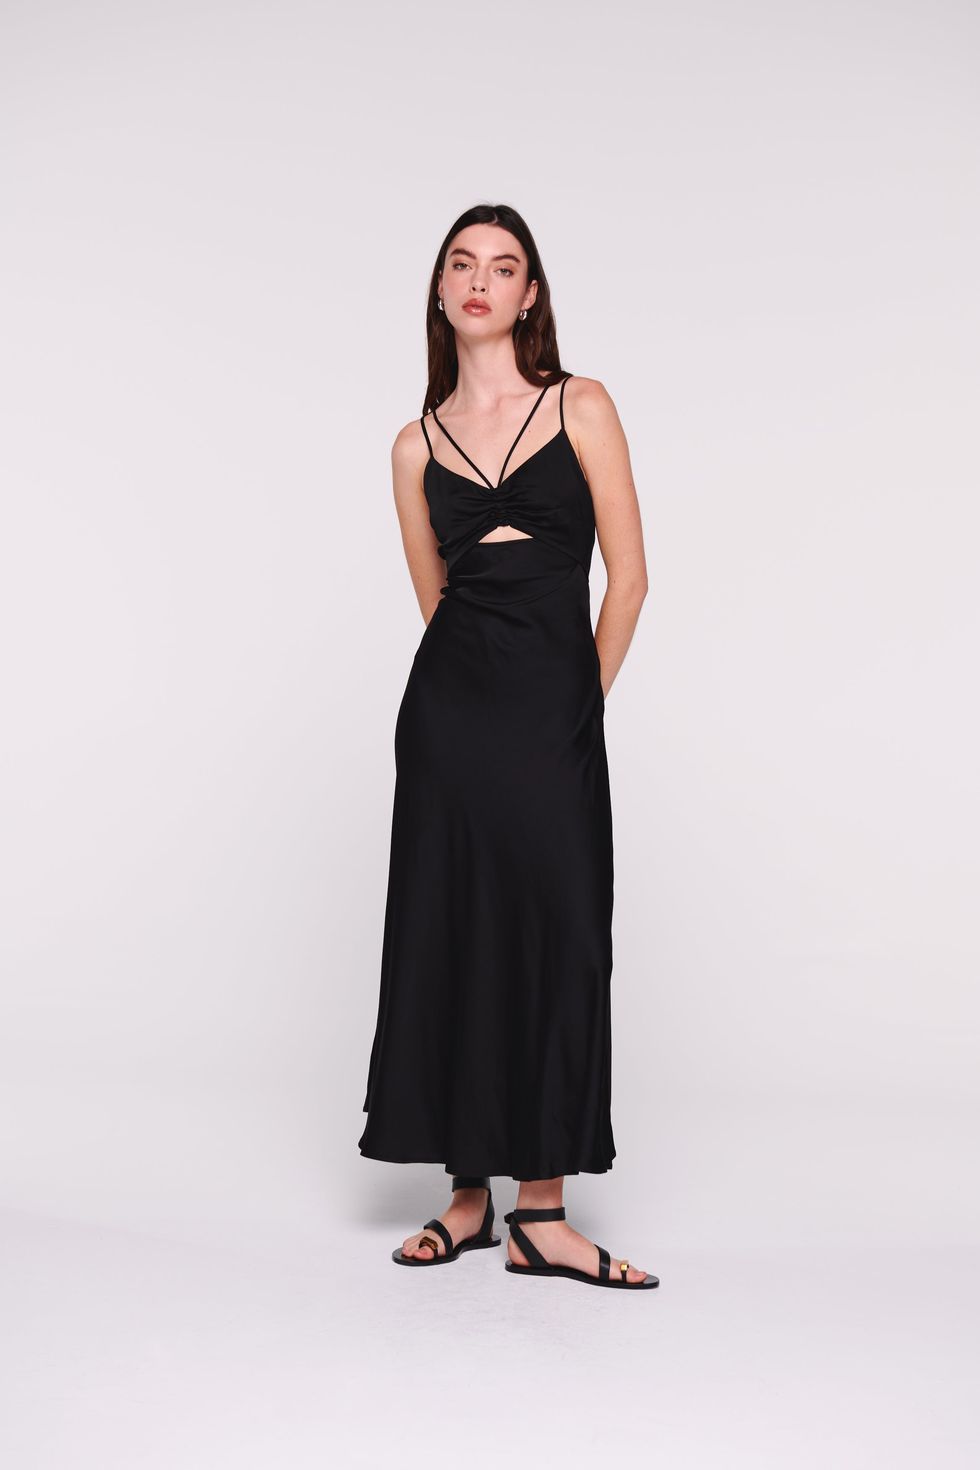 Aligne's sell-out Gabriella dress is back for spring/summer